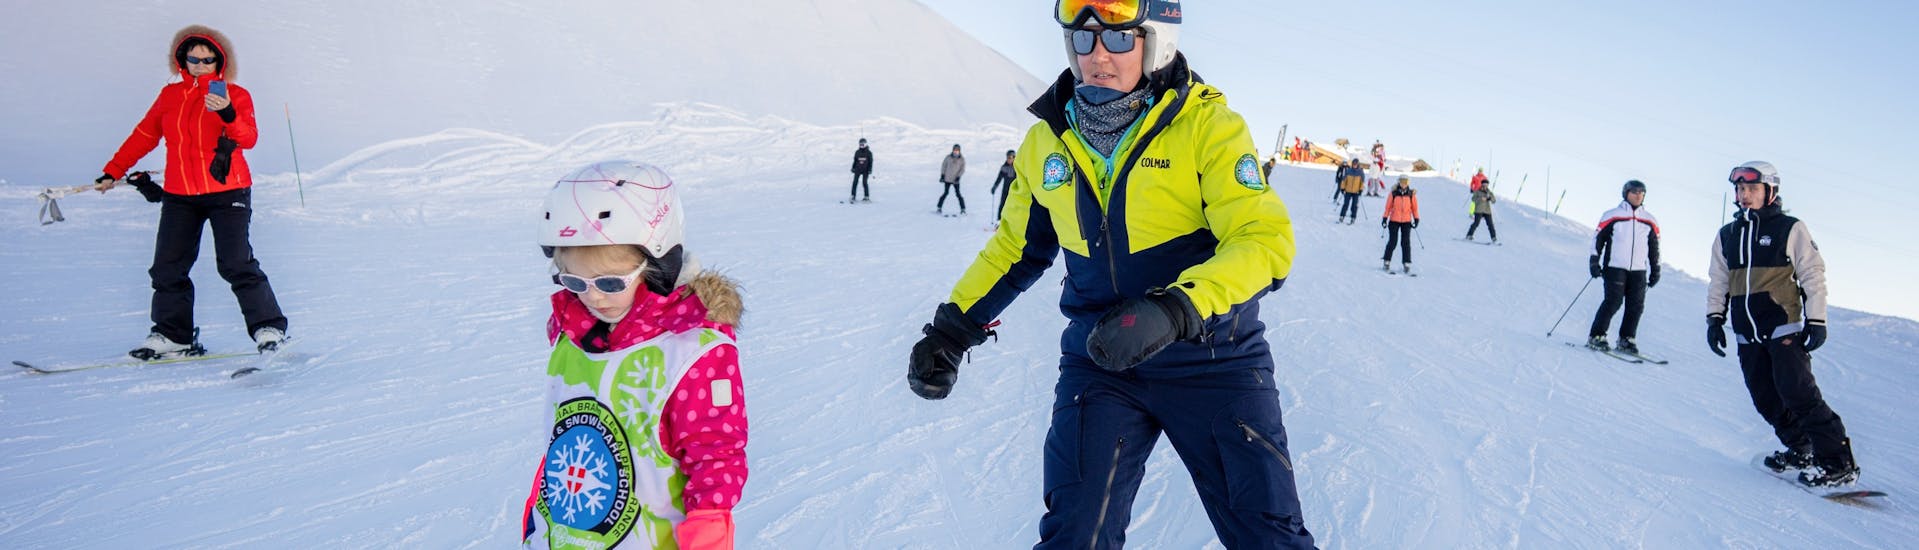 A kid is skiing down a slope in confidence thanks to her Private Ski Lessons for Kids & Teens of All Ages with Prosneige Val Thorens & Les Menuires.